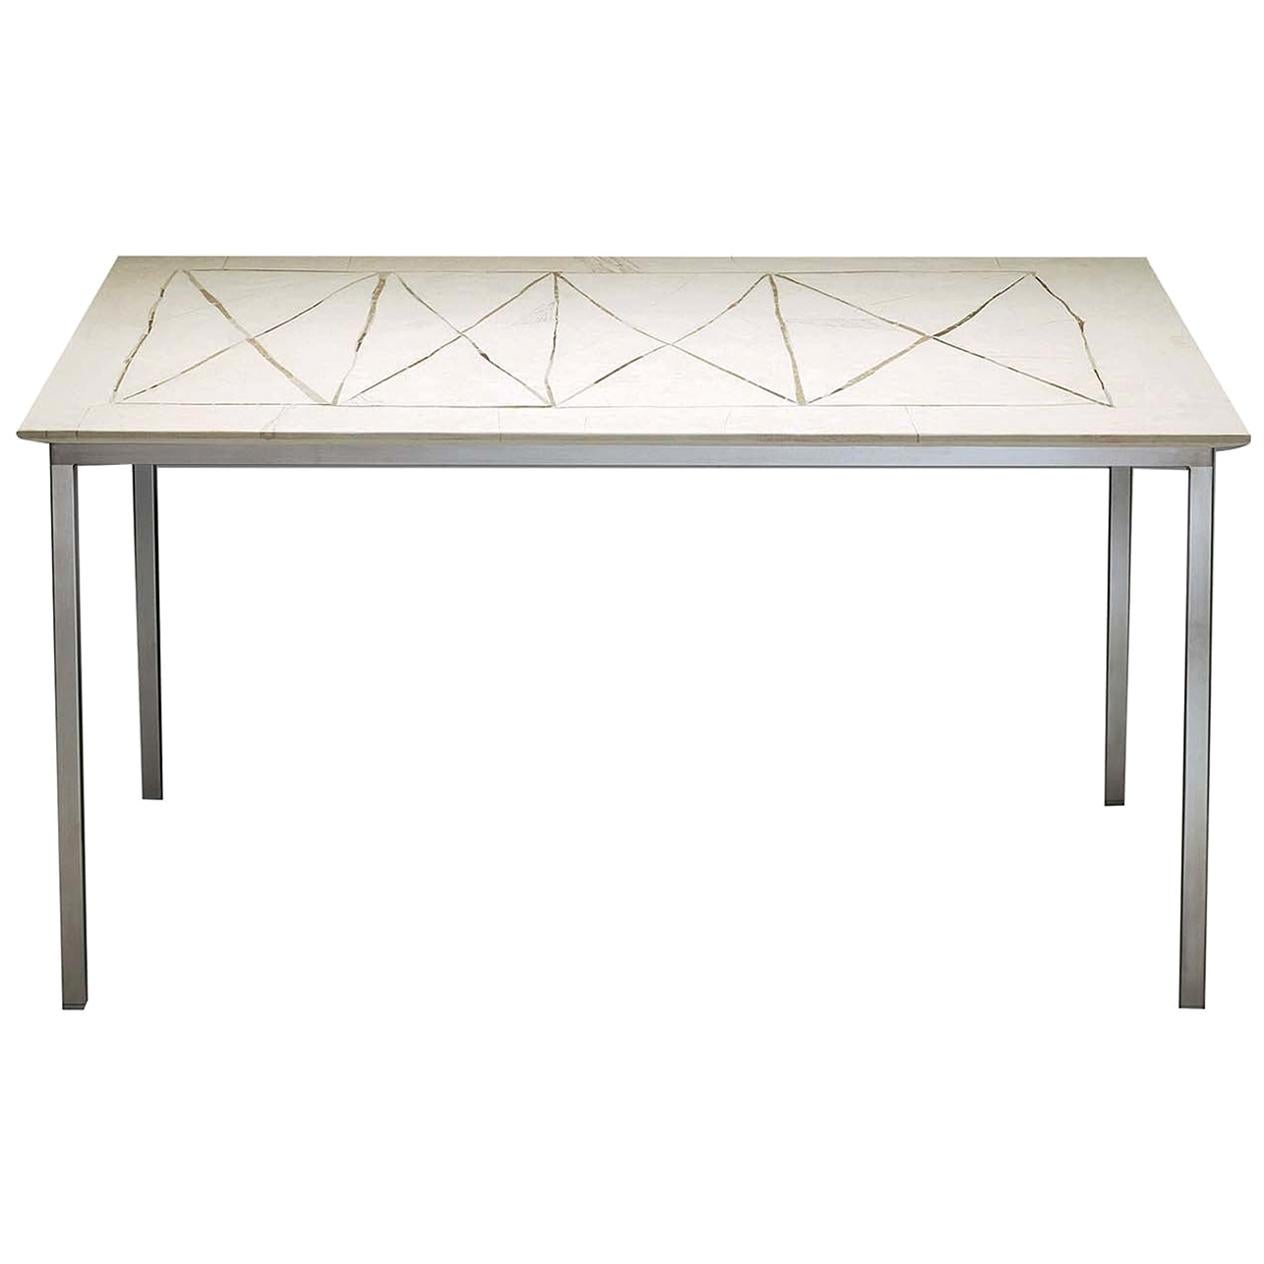 Table with Diamond-Shaped Motif